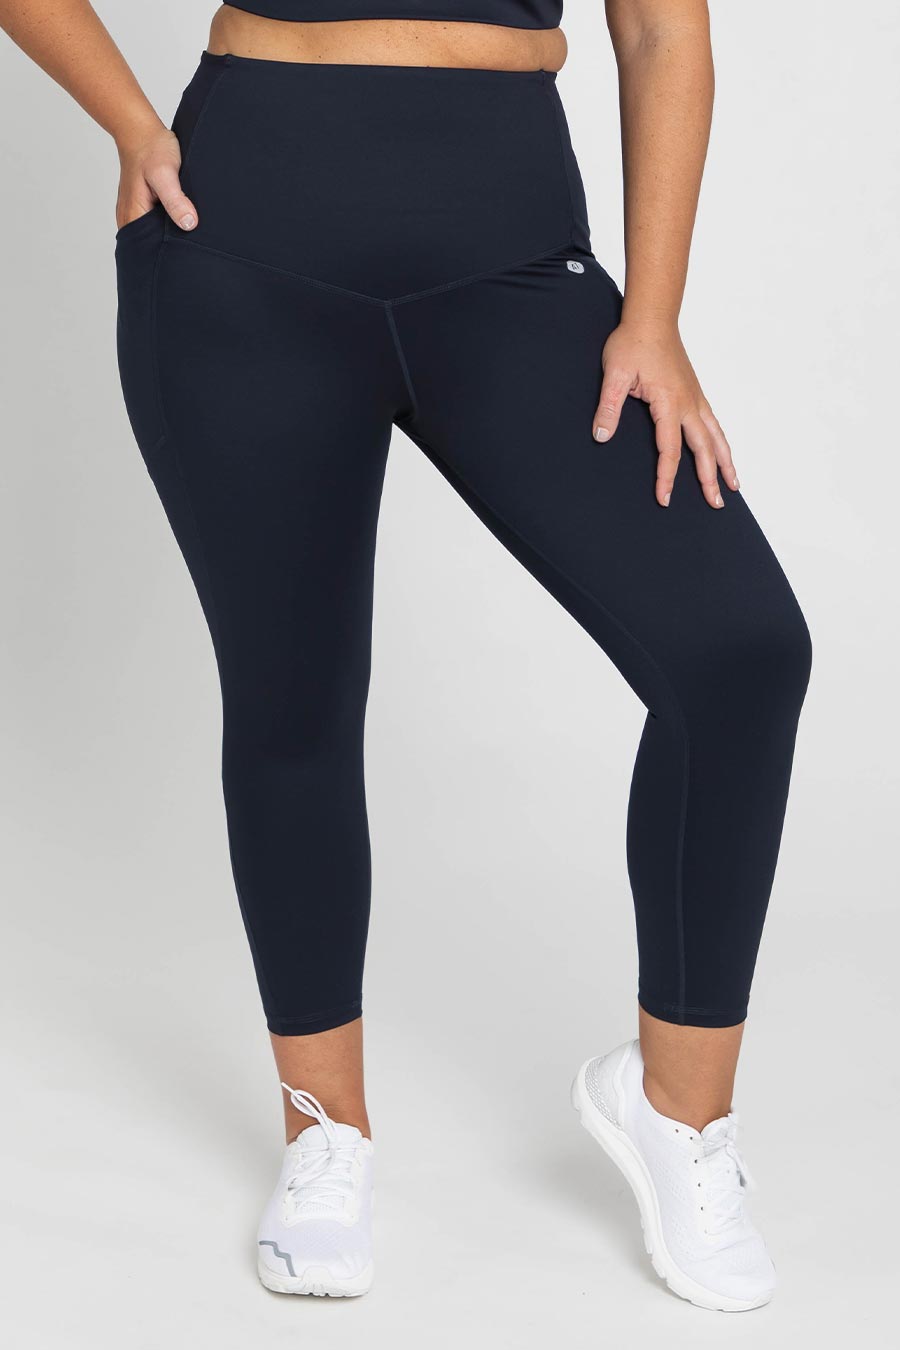 Core Pocket 7/8 tight in Navy, Core Support tight, Active Truth